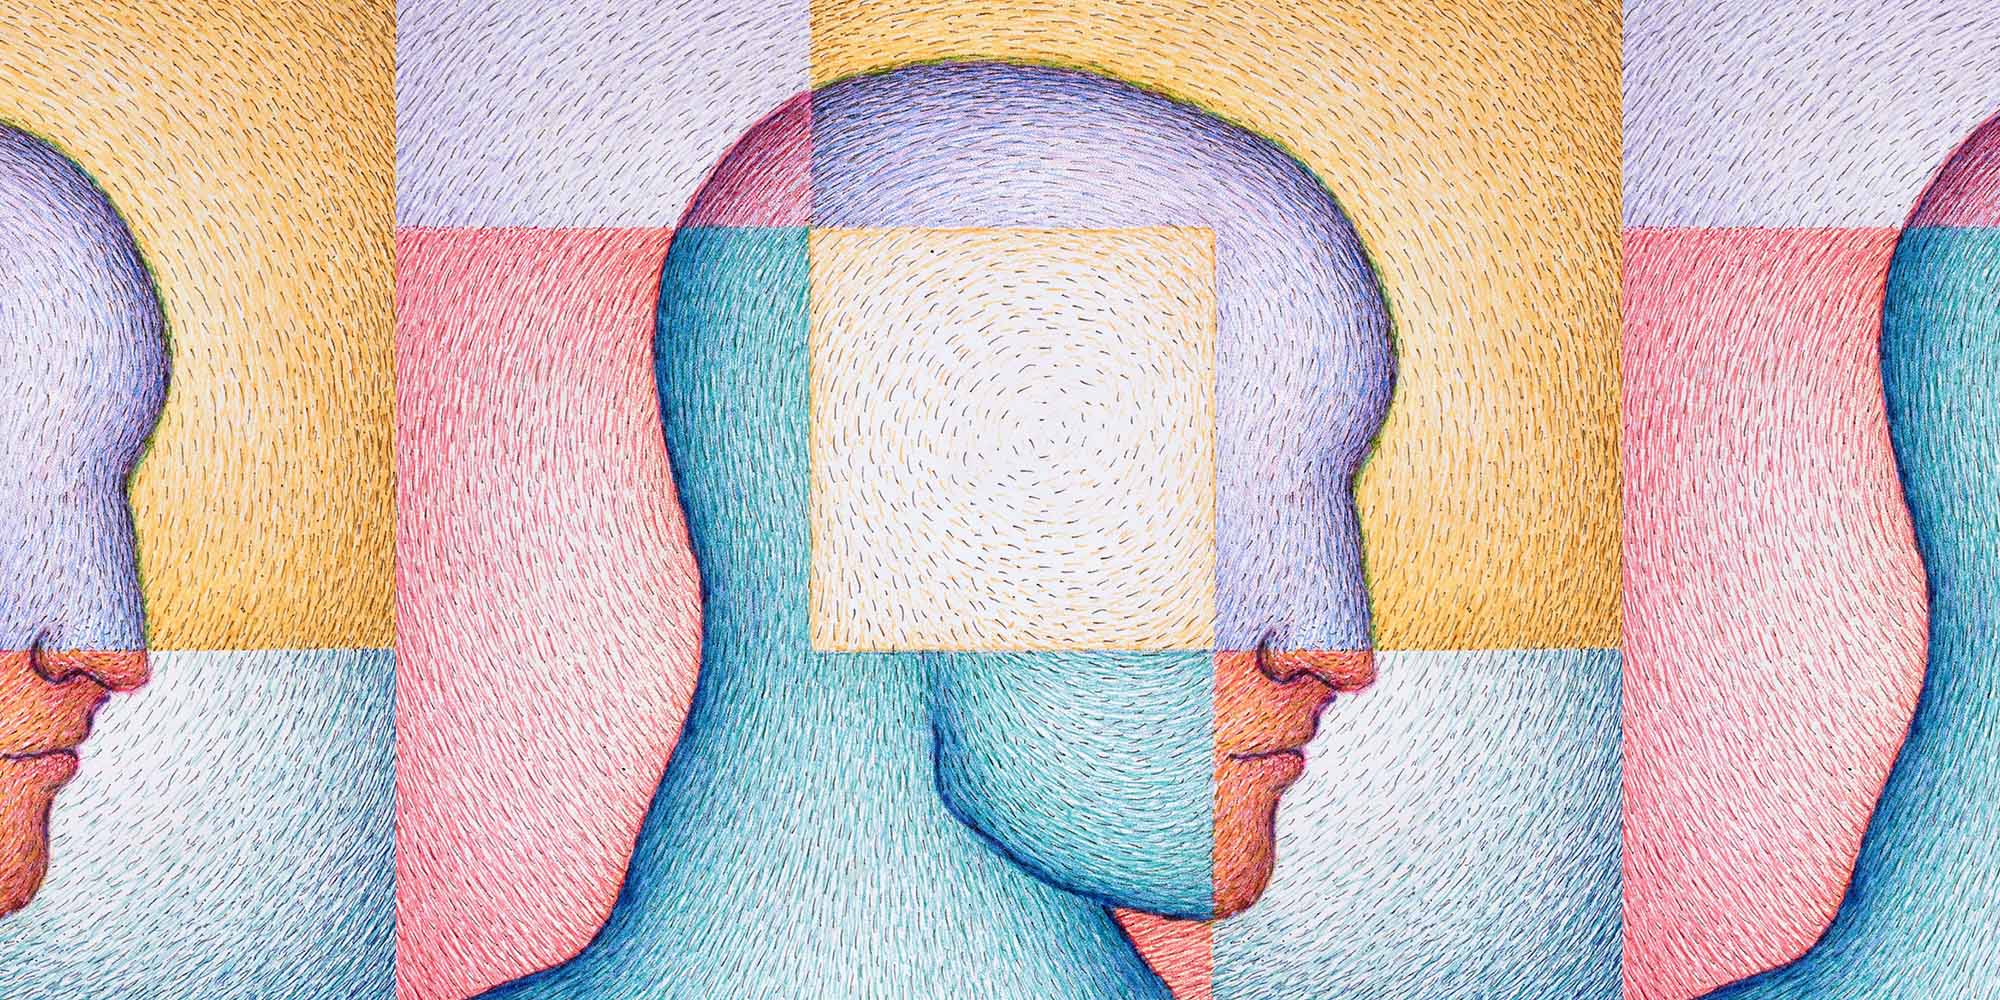 Perspectives on the Self: Conversations on Identity & Consciousness